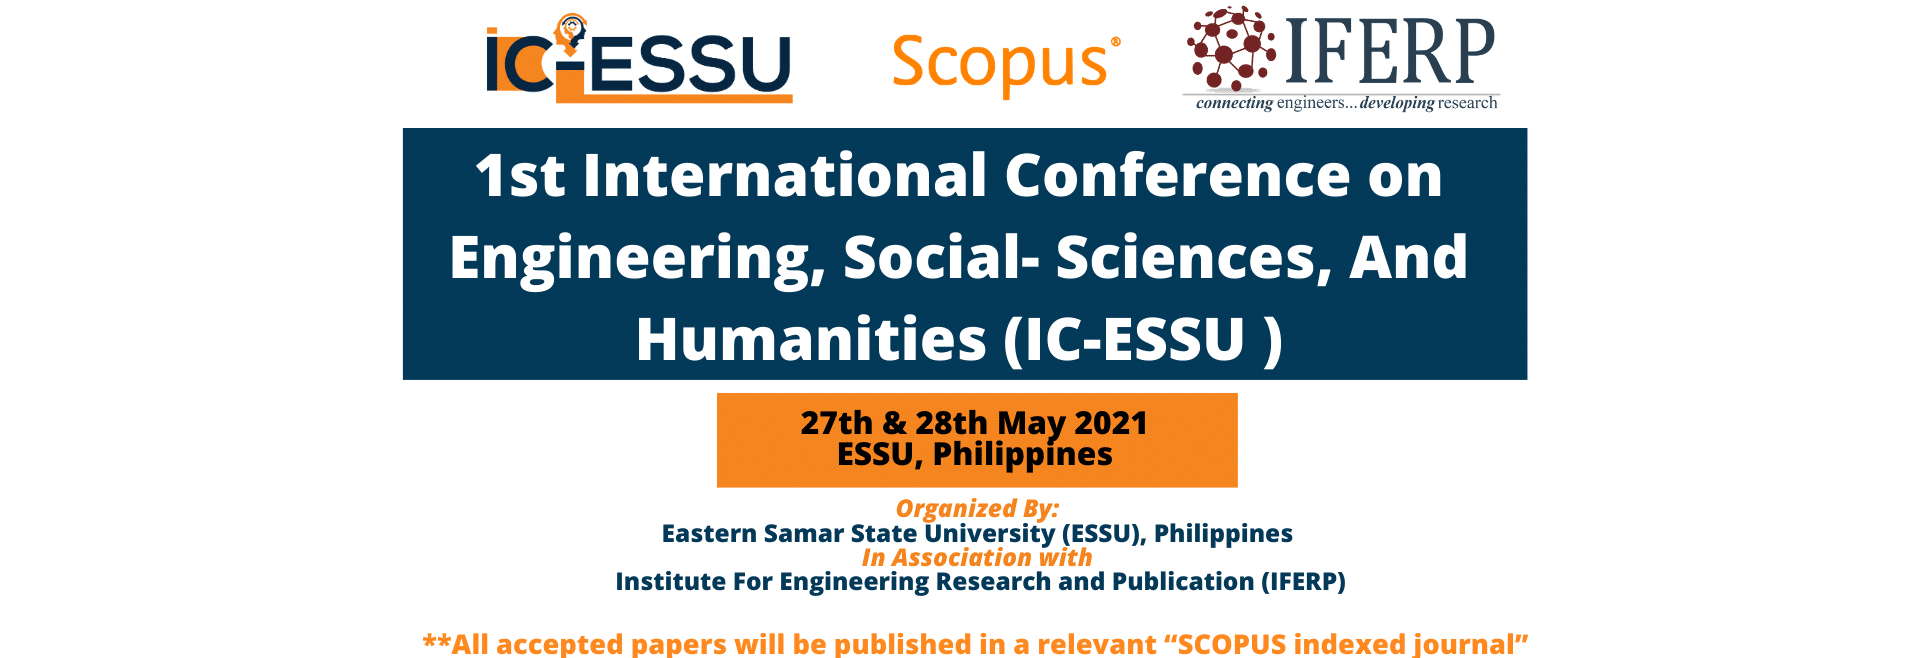 1st International Conference on Engineering, Social- Sciences, And Humanities (IC-ESSU)